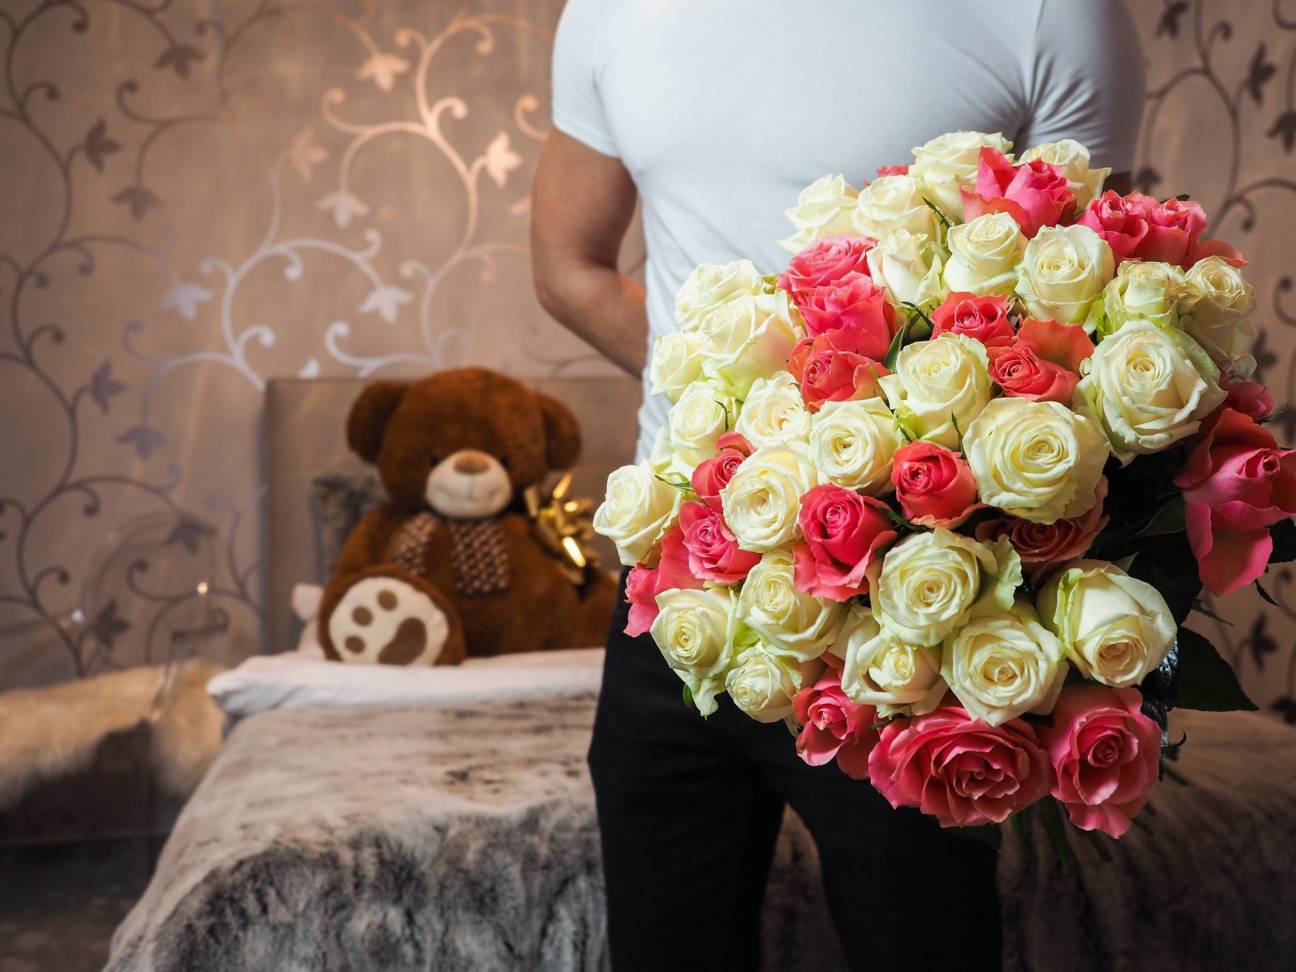 Situations Where a Florist Same Day Delivery Service Can Come in Handy - image Get-Your-Fresh-Flowers-from-Houston’s-Most-Dependable-Flower-Shop-1296x972 on https://www.riveroaksplanthouse.com